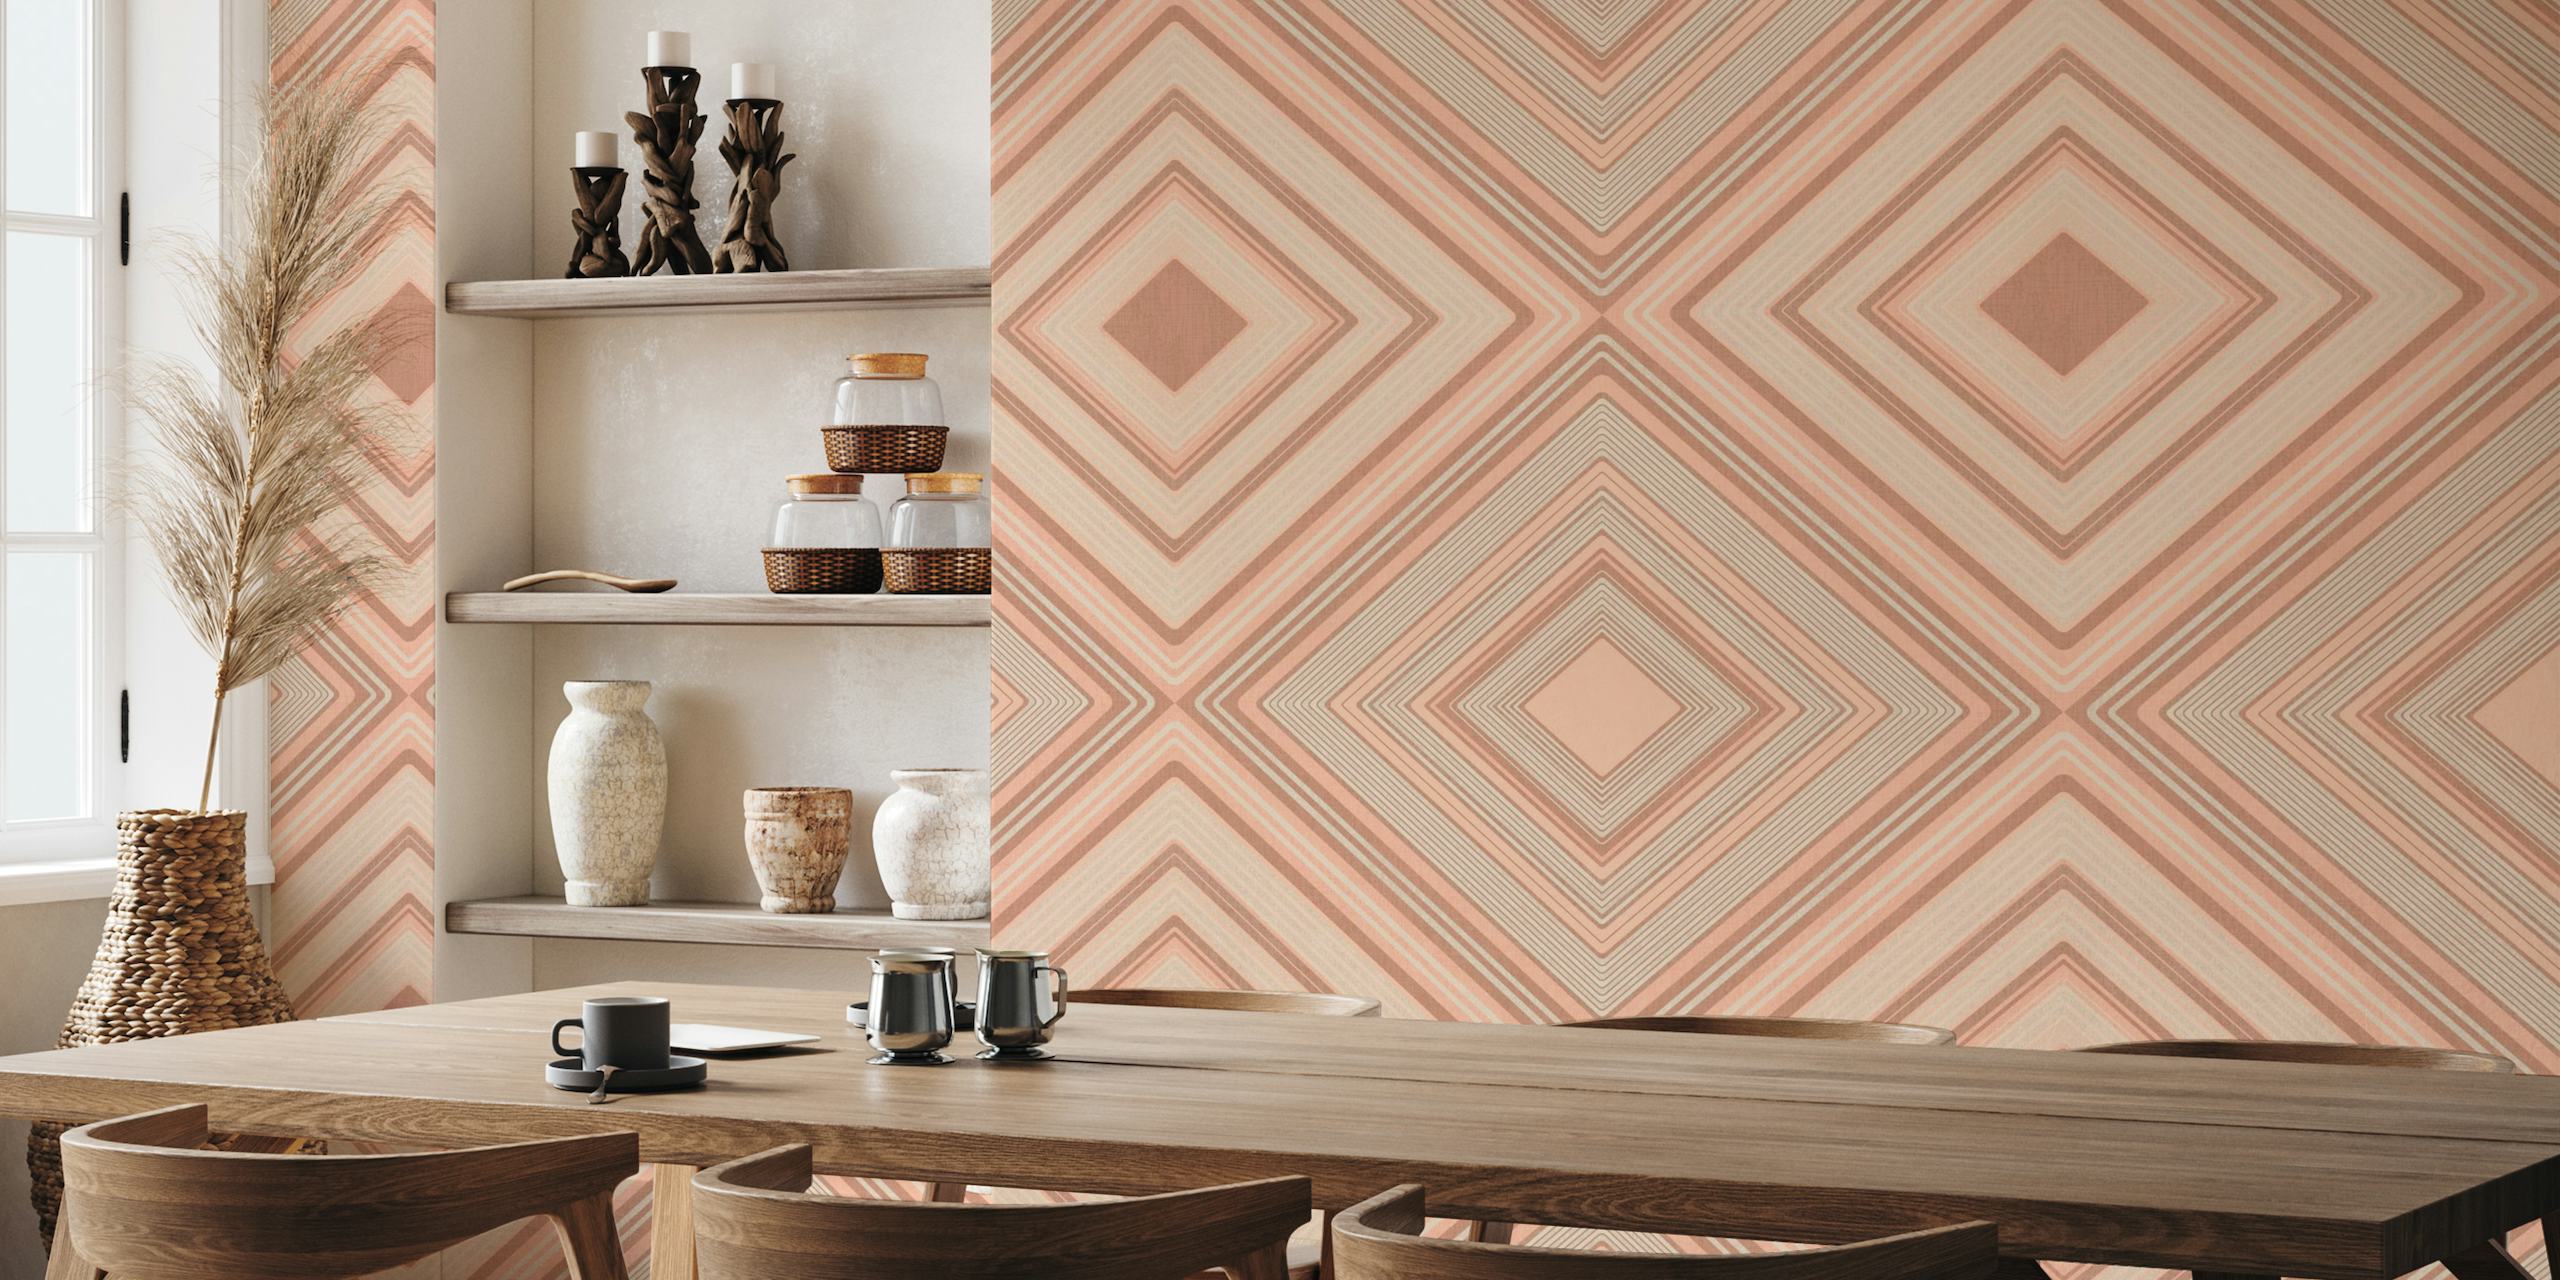 Retro lounge-style diamond pattern wall mural in peach and neutral tones